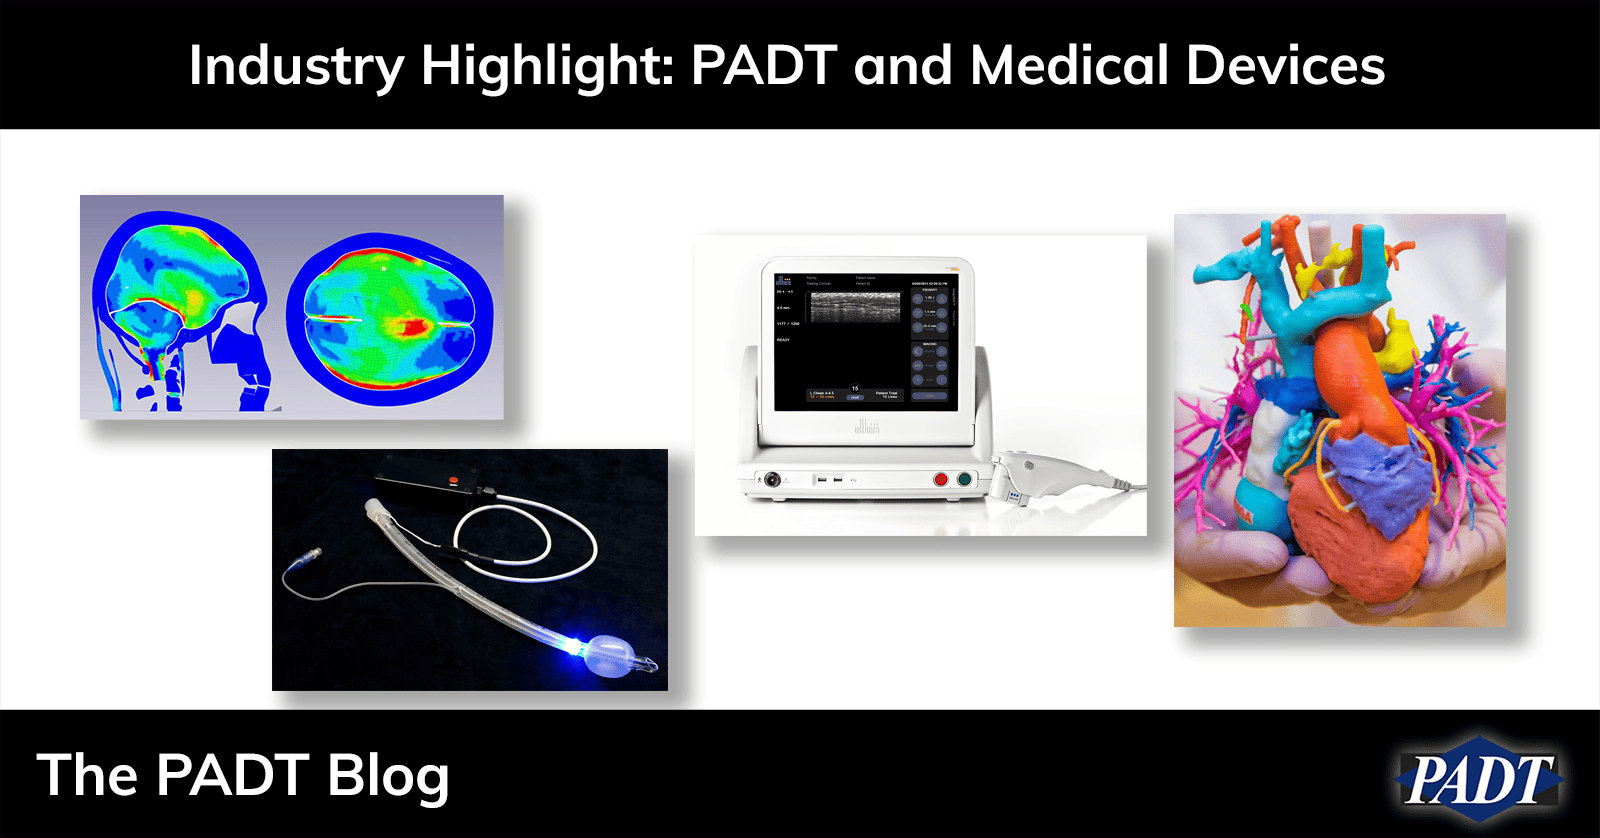 PADT and Medical Device Development Blog Post